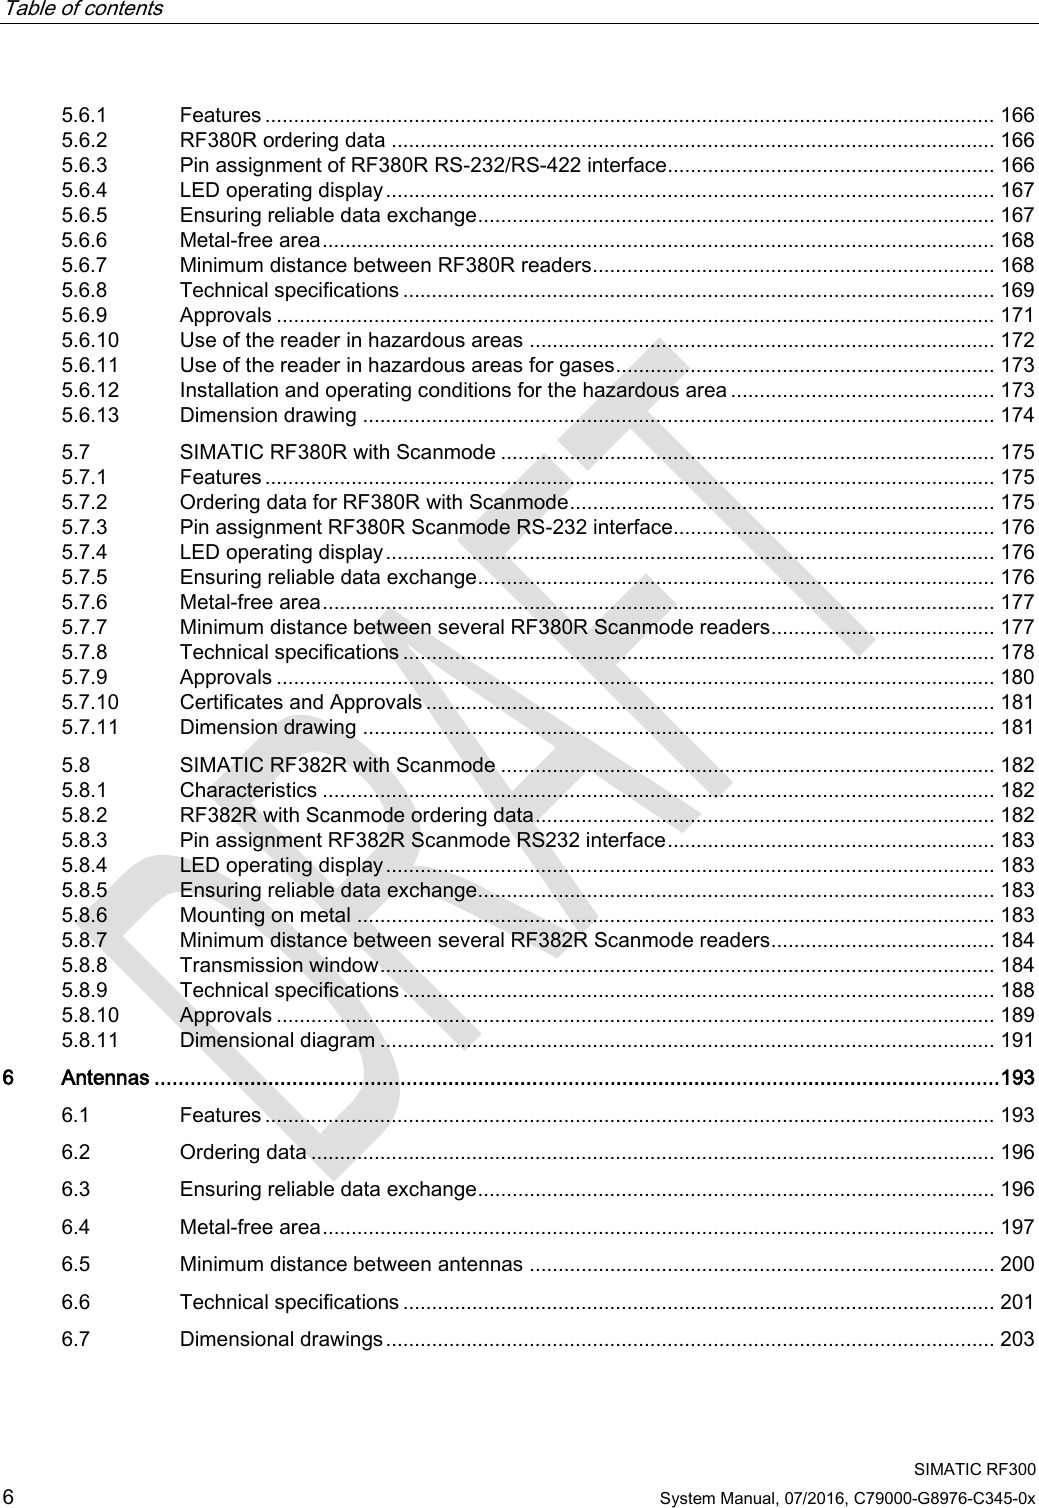 Table of contents     SIMATIC RF300 6 System Manual, 07/2016, C79000-G8976-C345-0x 5.6.1 Features ............................................................................................................................... 166 5.6.2 RF380R ordering data ......................................................................................................... 166 5.6.3 Pin assignment of RF380R RS-232/RS-422 interface......................................................... 166 5.6.4 LED operating display .......................................................................................................... 167 5.6.5 Ensuring reliable data exchange .......................................................................................... 167 5.6.6 Metal-free area ..................................................................................................................... 168 5.6.7 Minimum distance between RF380R readers ...................................................................... 168 5.6.8 Technical specifications ....................................................................................................... 169 5.6.9 Approvals ............................................................................................................................. 171 5.6.10 Use of the reader in hazardous areas ................................................................................. 172 5.6.11 Use of the reader in hazardous areas for gases .................................................................. 173 5.6.12 Installation and operating conditions for the hazardous area .............................................. 173 5.6.13 Dimension drawing .............................................................................................................. 174 5.7 SIMATIC RF380R with Scanmode ...................................................................................... 175 5.7.1 Features ............................................................................................................................... 175 5.7.2 Ordering data for RF380R with Scanmode .......................................................................... 175 5.7.3 Pin assignment RF380R Scanmode RS-232 interface........................................................ 176 5.7.4 LED operating display .......................................................................................................... 176 5.7.5 Ensuring reliable data exchange .......................................................................................... 176 5.7.6 Metal-free area ..................................................................................................................... 177 5.7.7 Minimum distance between several RF380R Scanmode readers ....................................... 177 5.7.8 Technical specifications ....................................................................................................... 178 5.7.9 Approvals ............................................................................................................................. 180 5.7.10 Certificates and Approvals ................................................................................................... 181 5.7.11 Dimension drawing .............................................................................................................. 181 5.8 SIMATIC RF382R with Scanmode ...................................................................................... 182 5.8.1 Characteristics ..................................................................................................................... 182 5.8.2 RF382R with Scanmode ordering data ................................................................................ 182 5.8.3 Pin assignment RF382R Scanmode RS232 interface ......................................................... 183 5.8.4 LED operating display .......................................................................................................... 183 5.8.5 Ensuring reliable data exchange .......................................................................................... 183 5.8.6 Mounting on metal ............................................................................................................... 183 5.8.7 Minimum distance between several RF382R Scanmode readers ....................................... 184 5.8.8 Transmission window ........................................................................................................... 184 5.8.9 Technical specifications ....................................................................................................... 188 5.8.10 Approvals ............................................................................................................................. 189 5.8.11 Dimensional diagram ........................................................................................................... 191 6  Antennas ............................................................................................................................................. 193 6.1 Features ............................................................................................................................... 193 6.2 Ordering data ....................................................................................................................... 196 6.3 Ensuring reliable data exchange .......................................................................................... 196 6.4 Metal-free area ..................................................................................................................... 197 6.5 Minimum distance between antennas ................................................................................. 200 6.6 Technical specifications ....................................................................................................... 201 6.7 Dimensional drawings .......................................................................................................... 203 